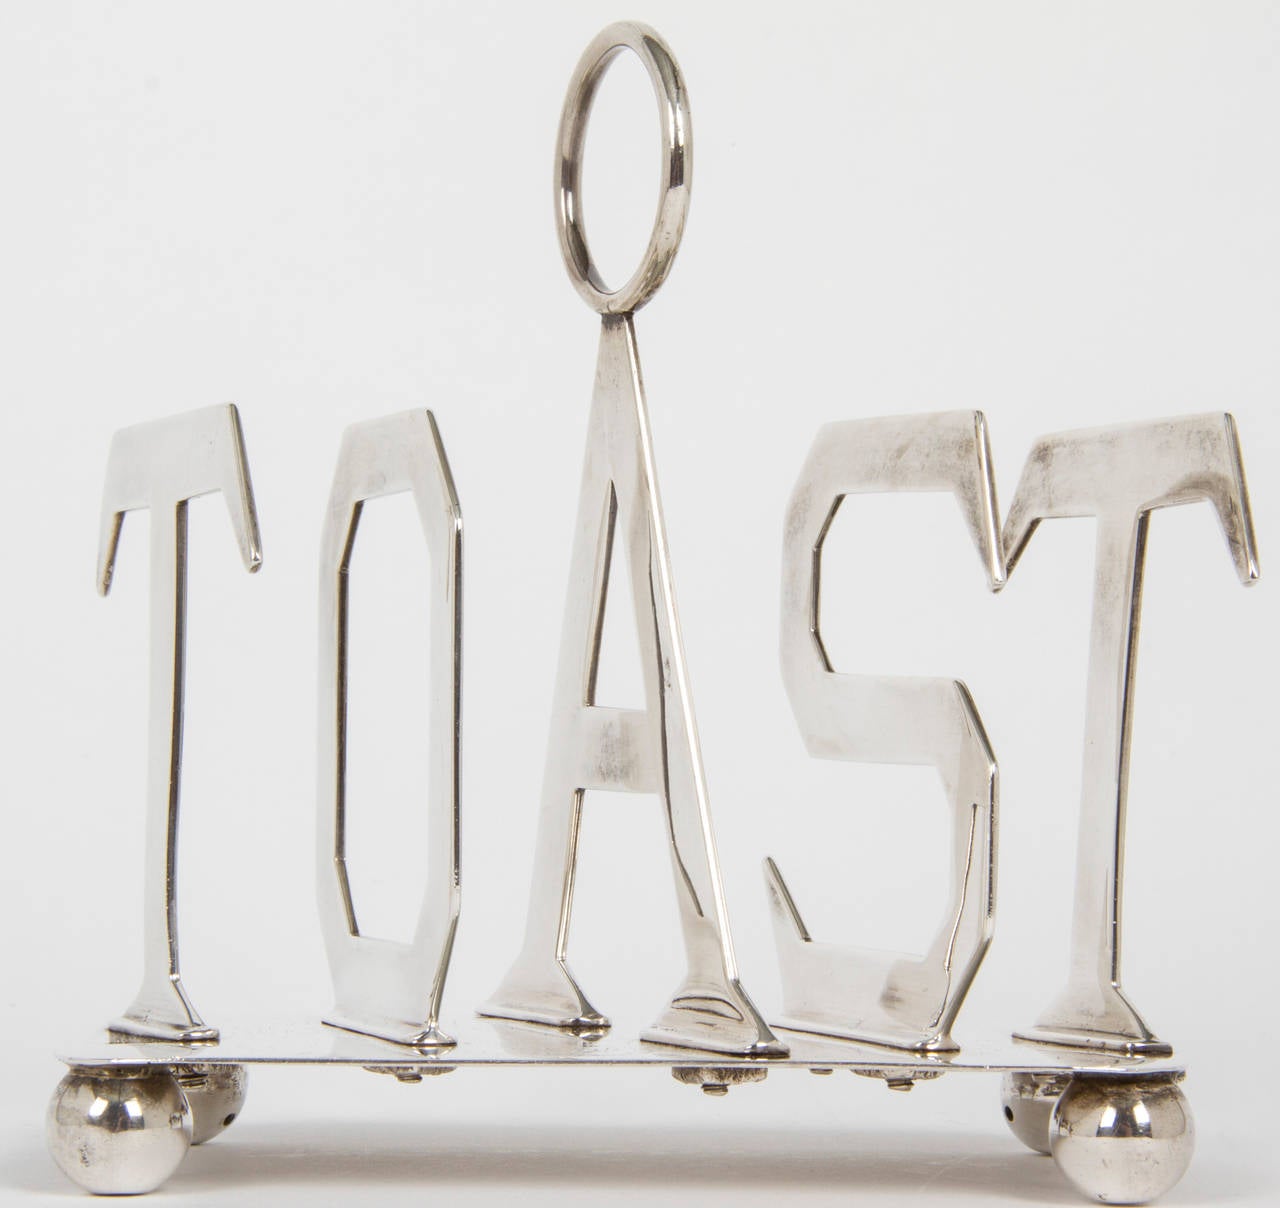 Late 19th Century Early English Sterling Silver 